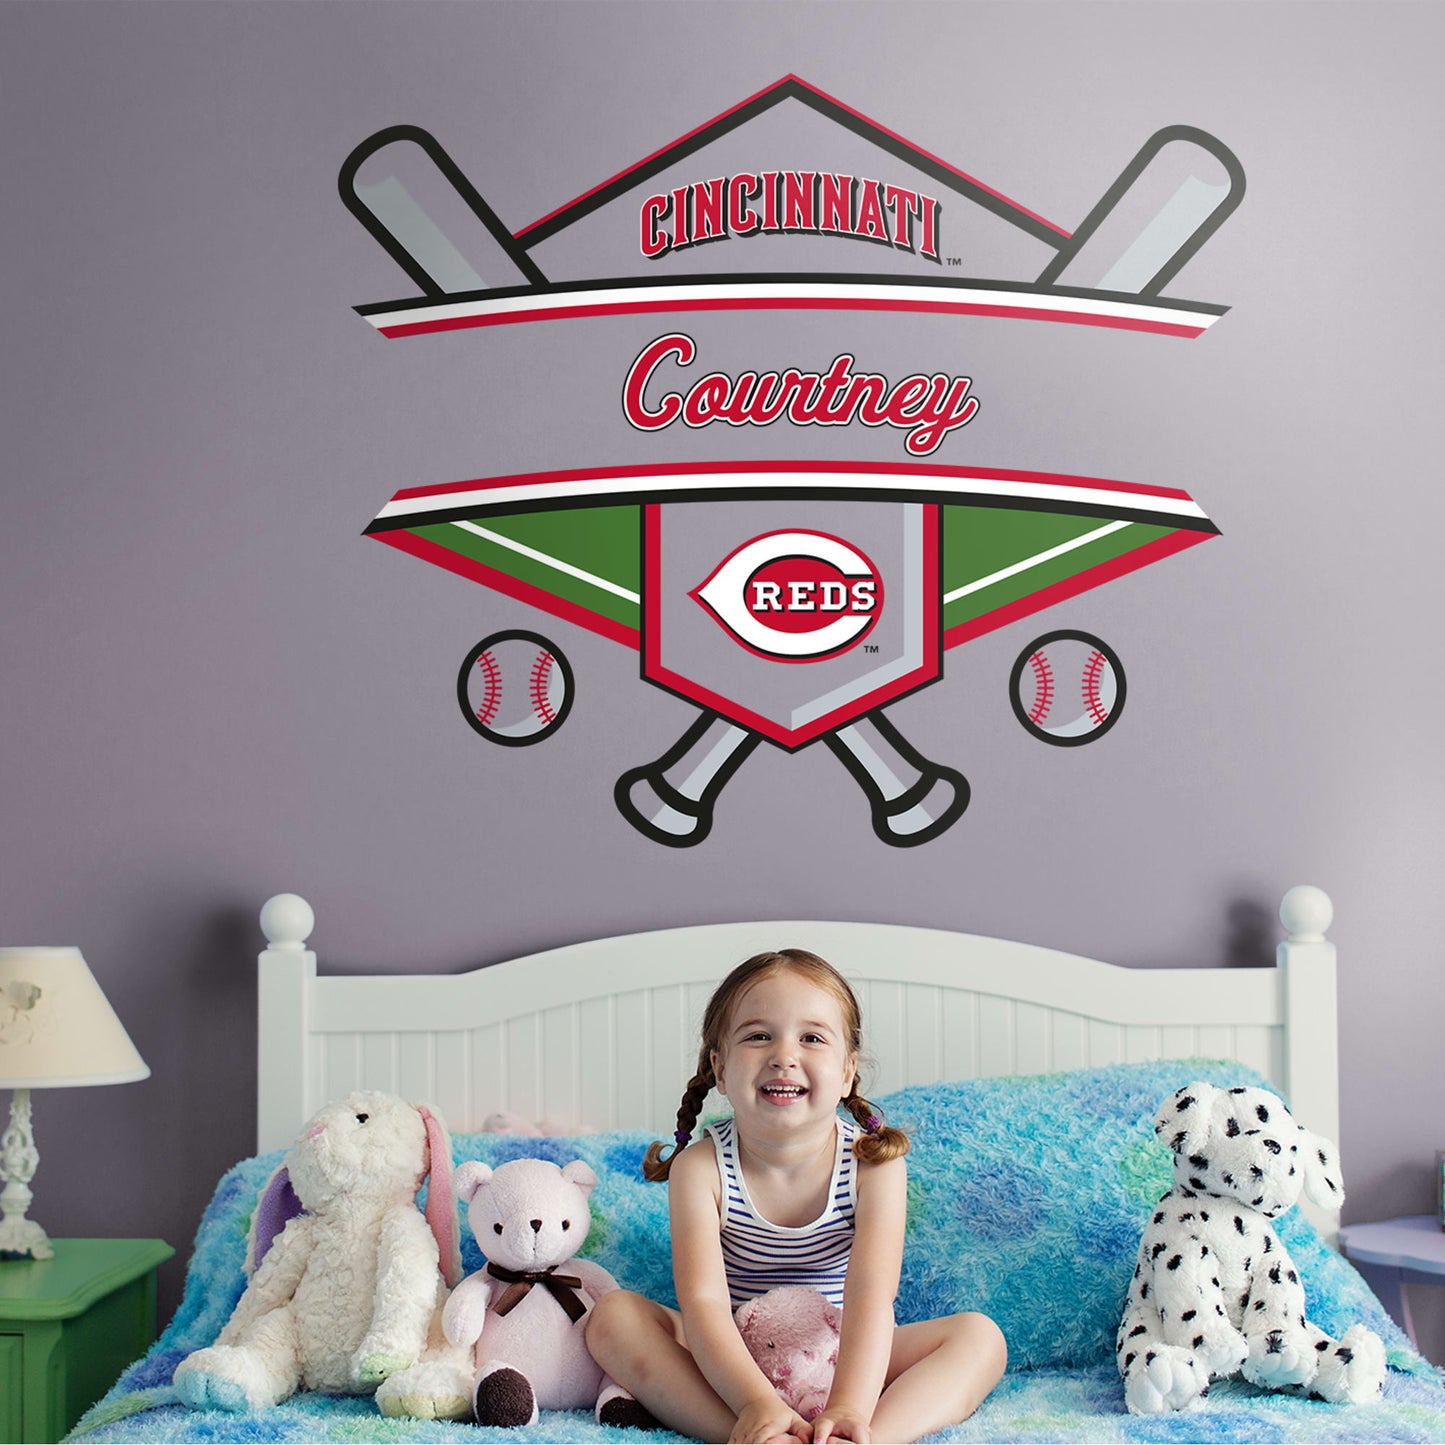 Cincinnati Reds: Personalized Name - Officially Licensed MLB Transfer Decal